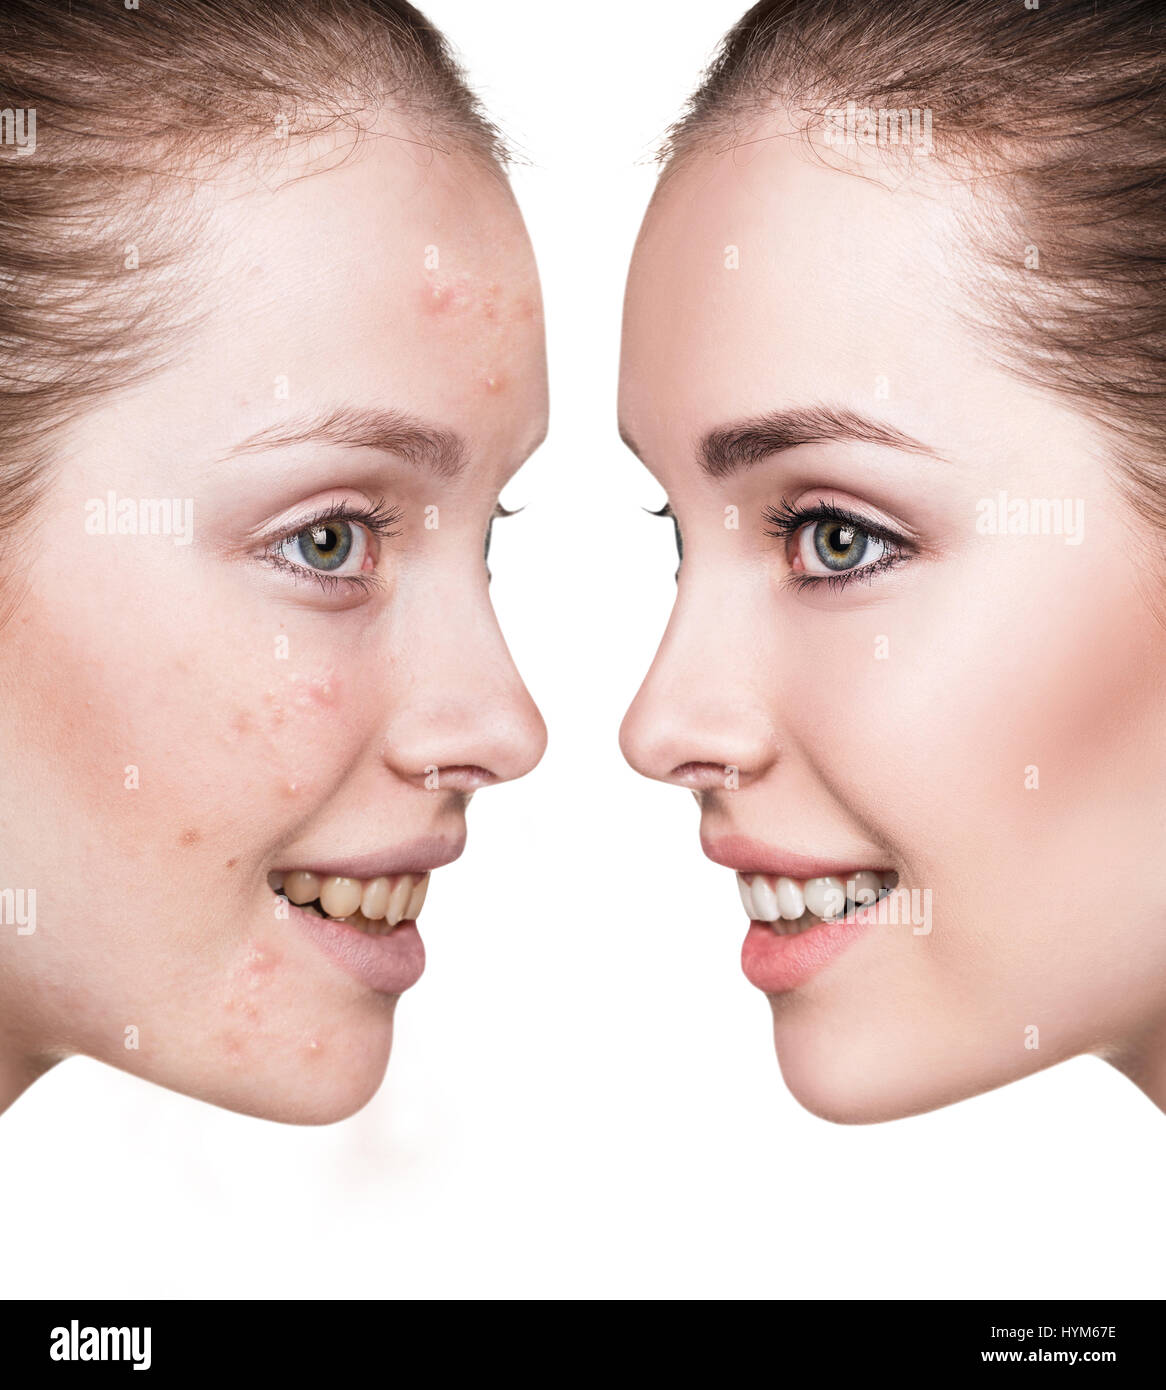 Girl with acne before and after treatment. Stock Photo